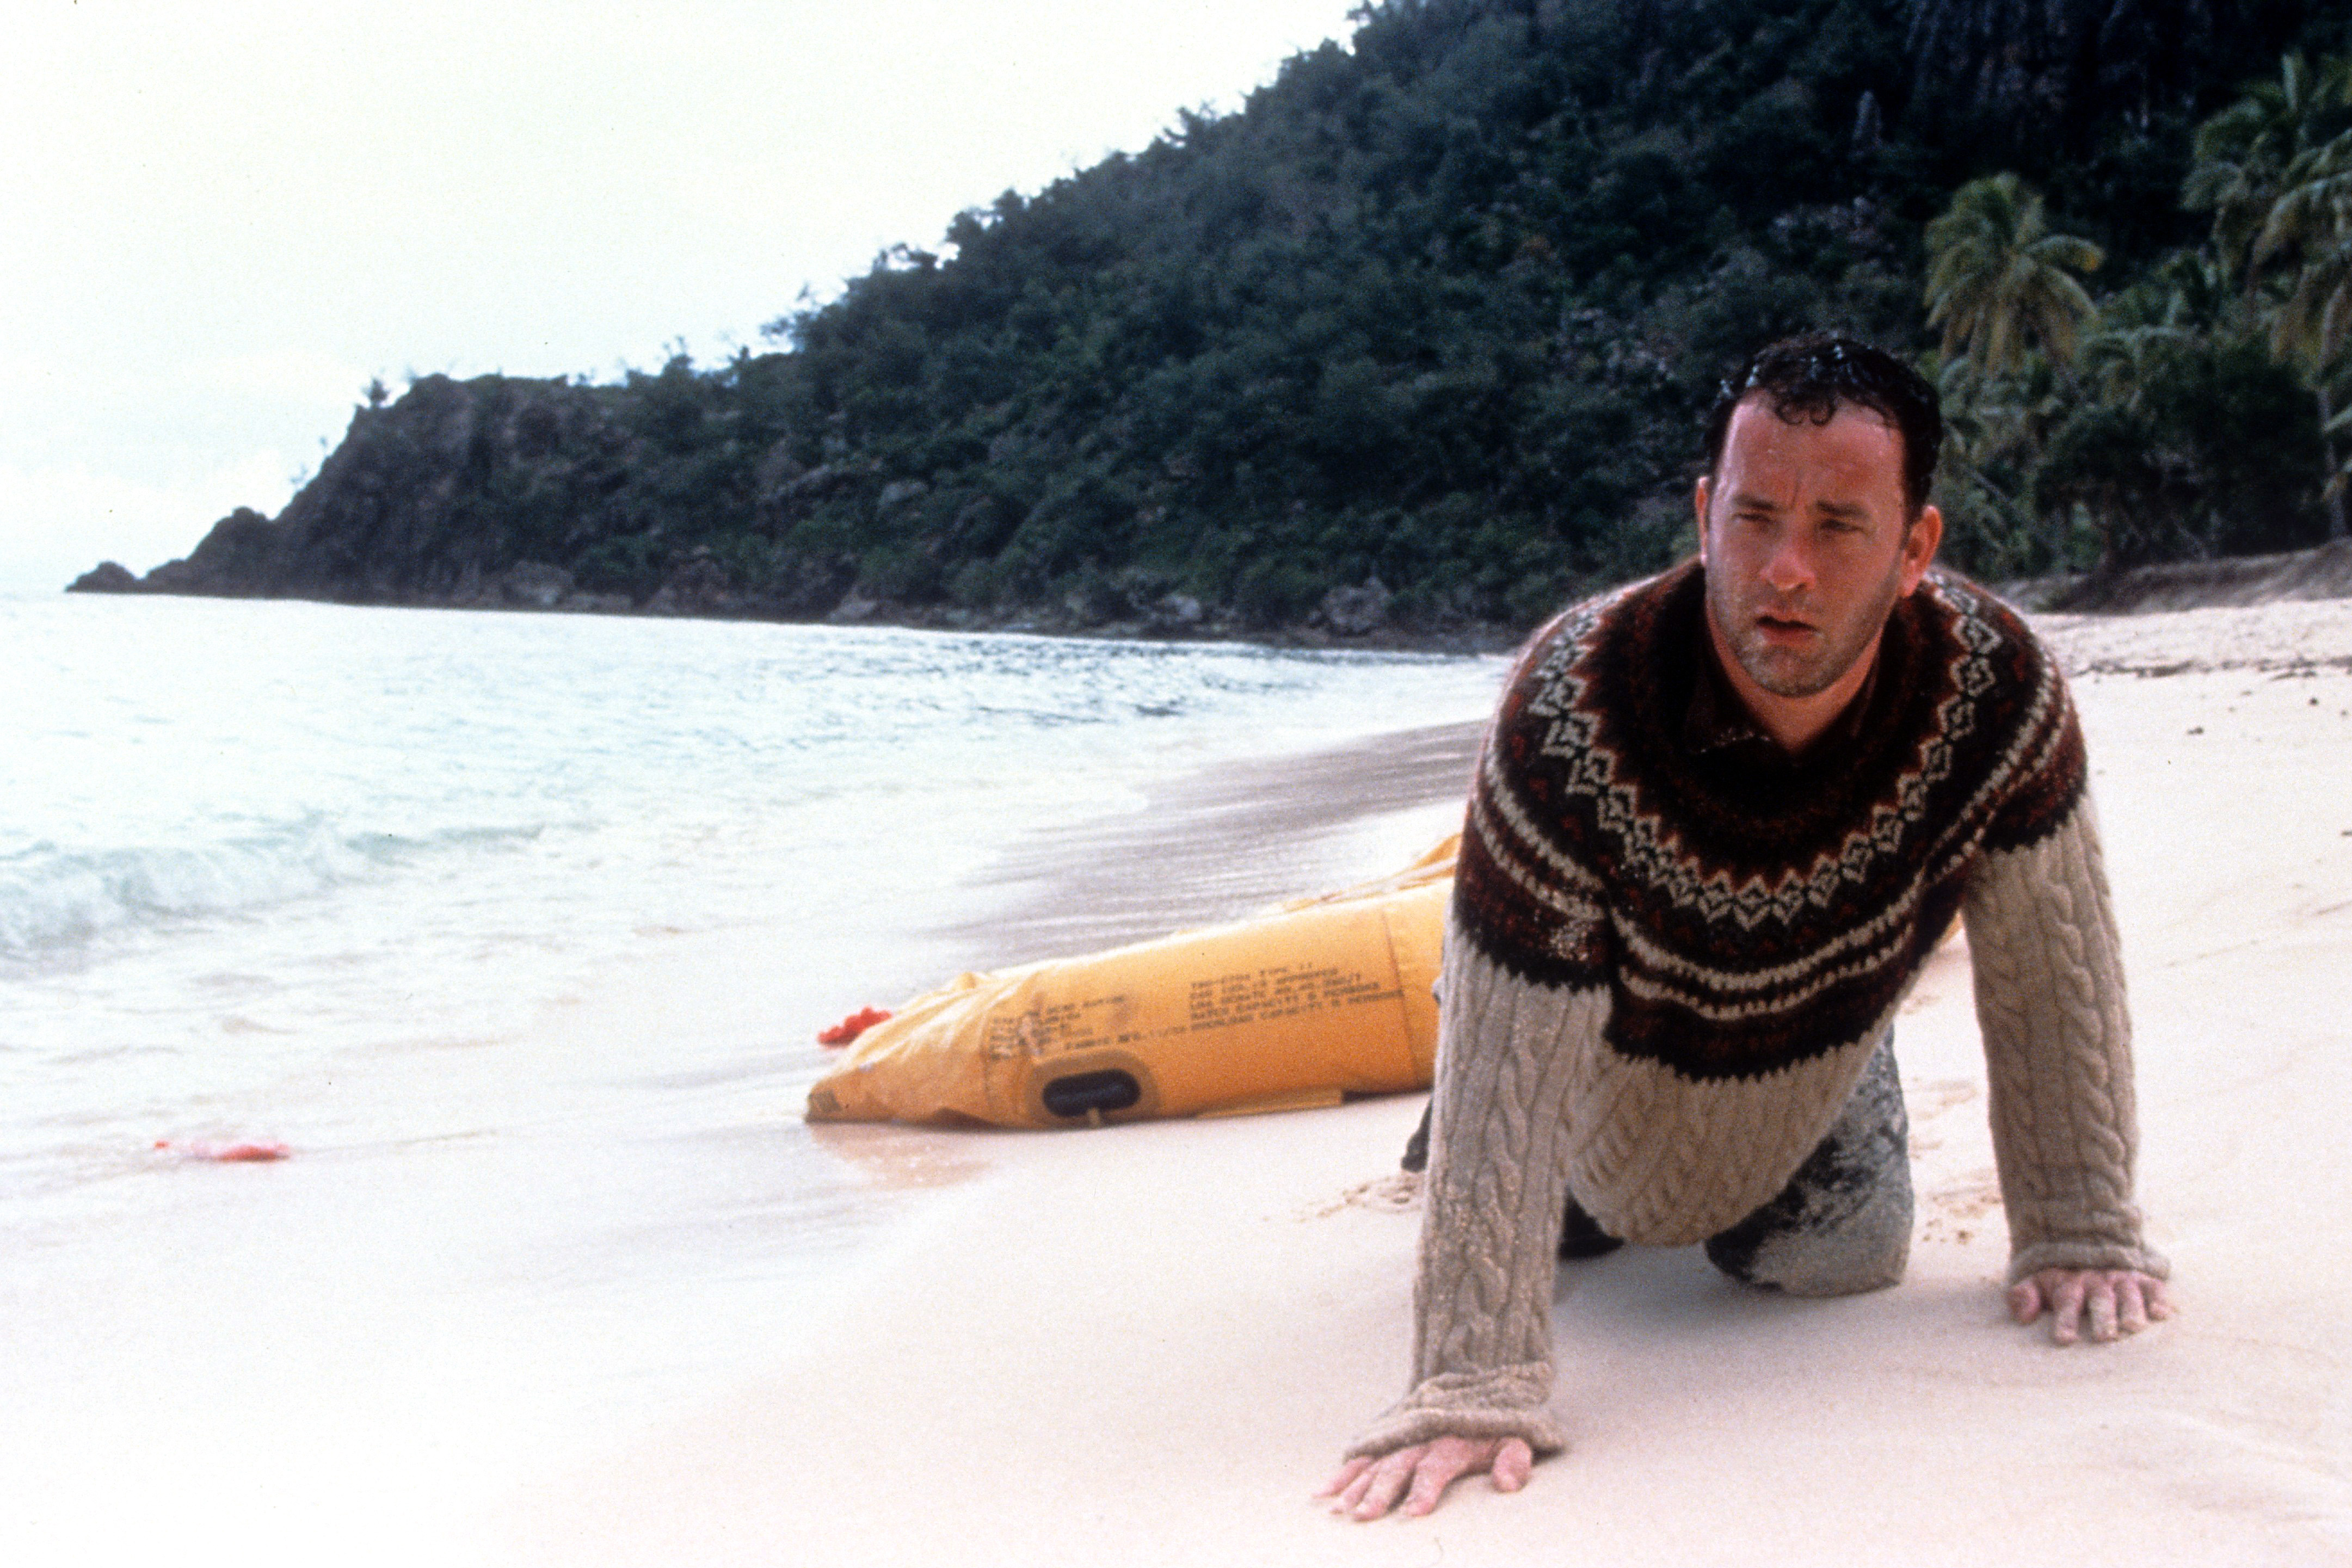 Which Tom Hanks movie is about an astronaut stranded in space after his ship is damaged?